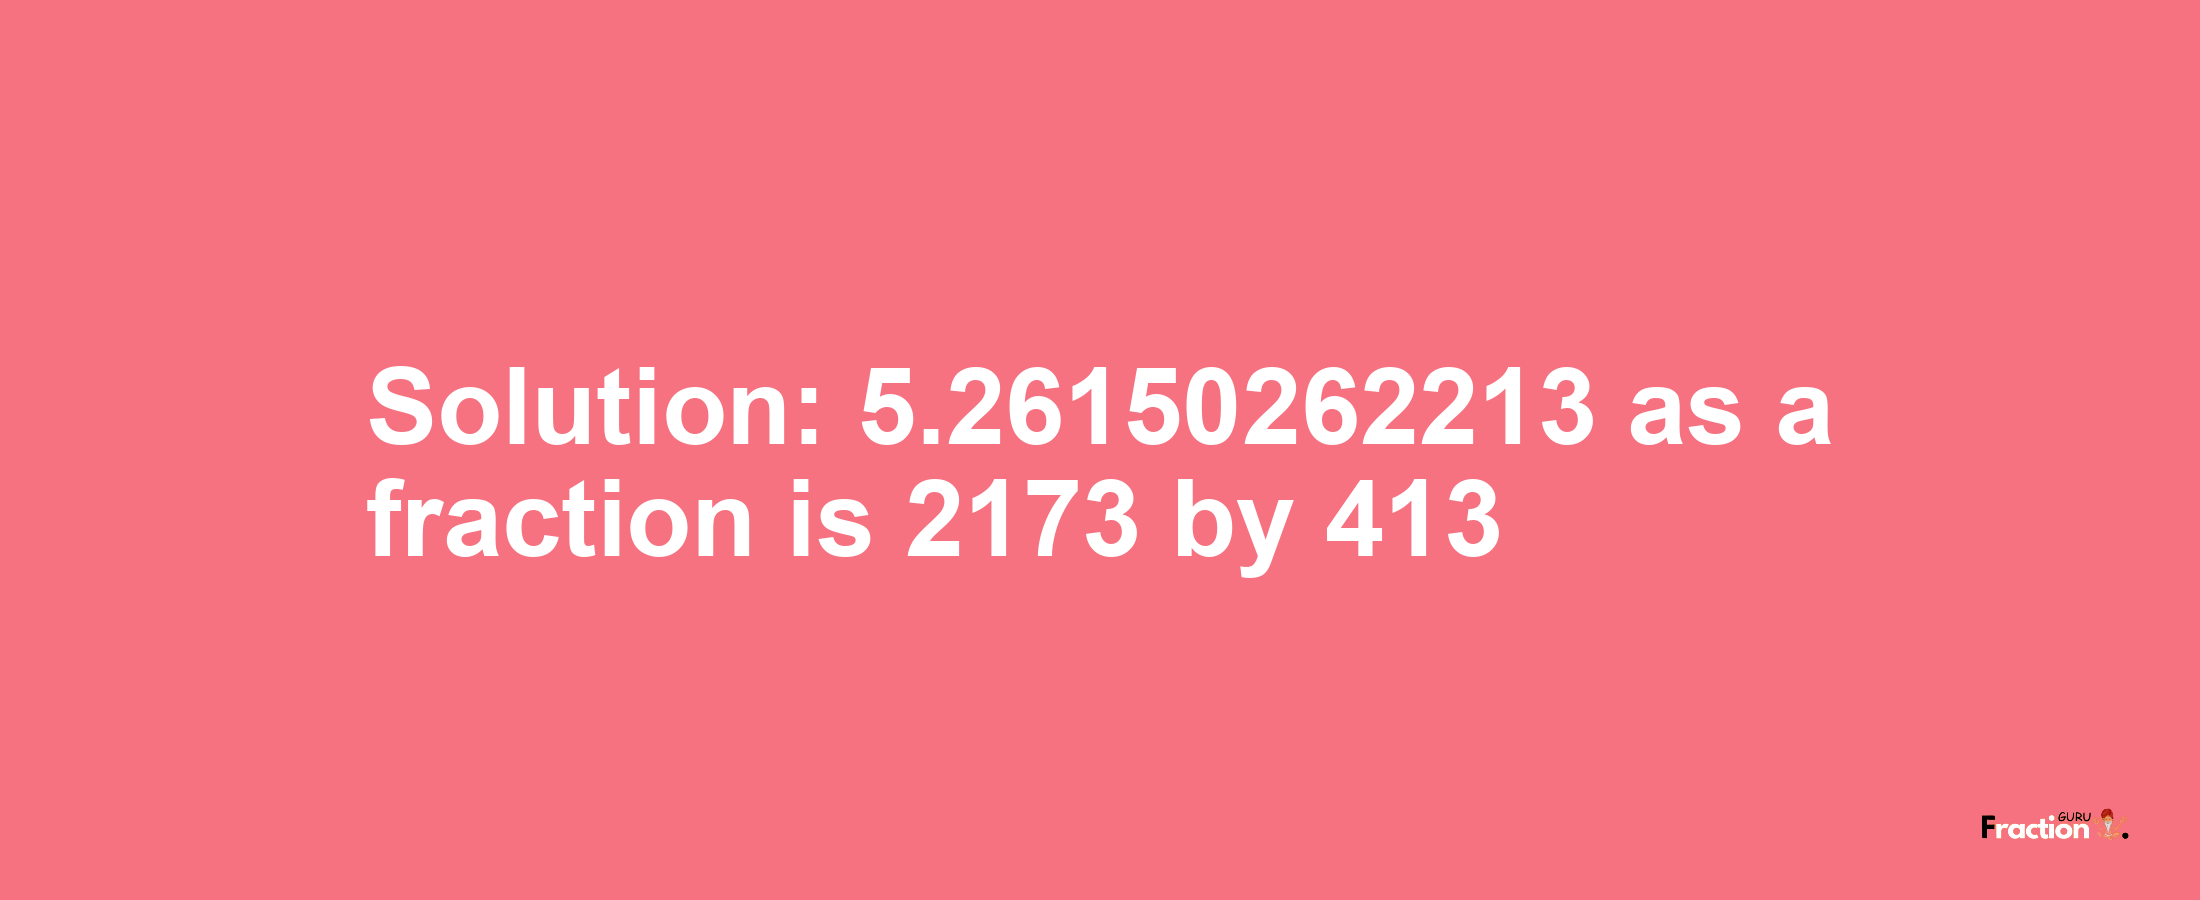 Solution:5.26150262213 as a fraction is 2173/413